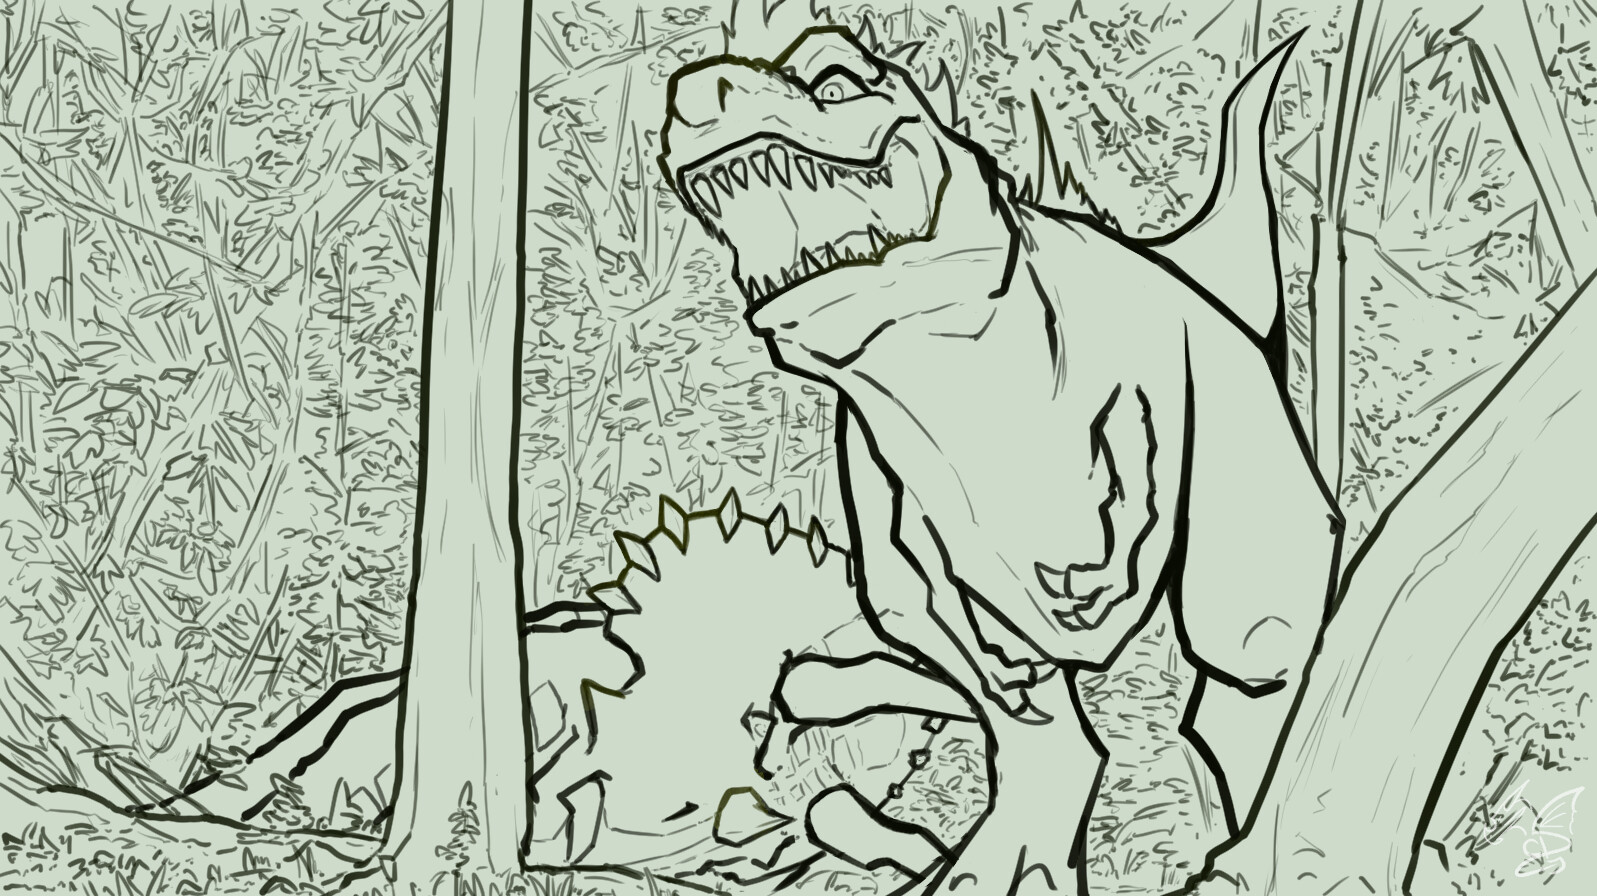 fossil fighters coloring pages